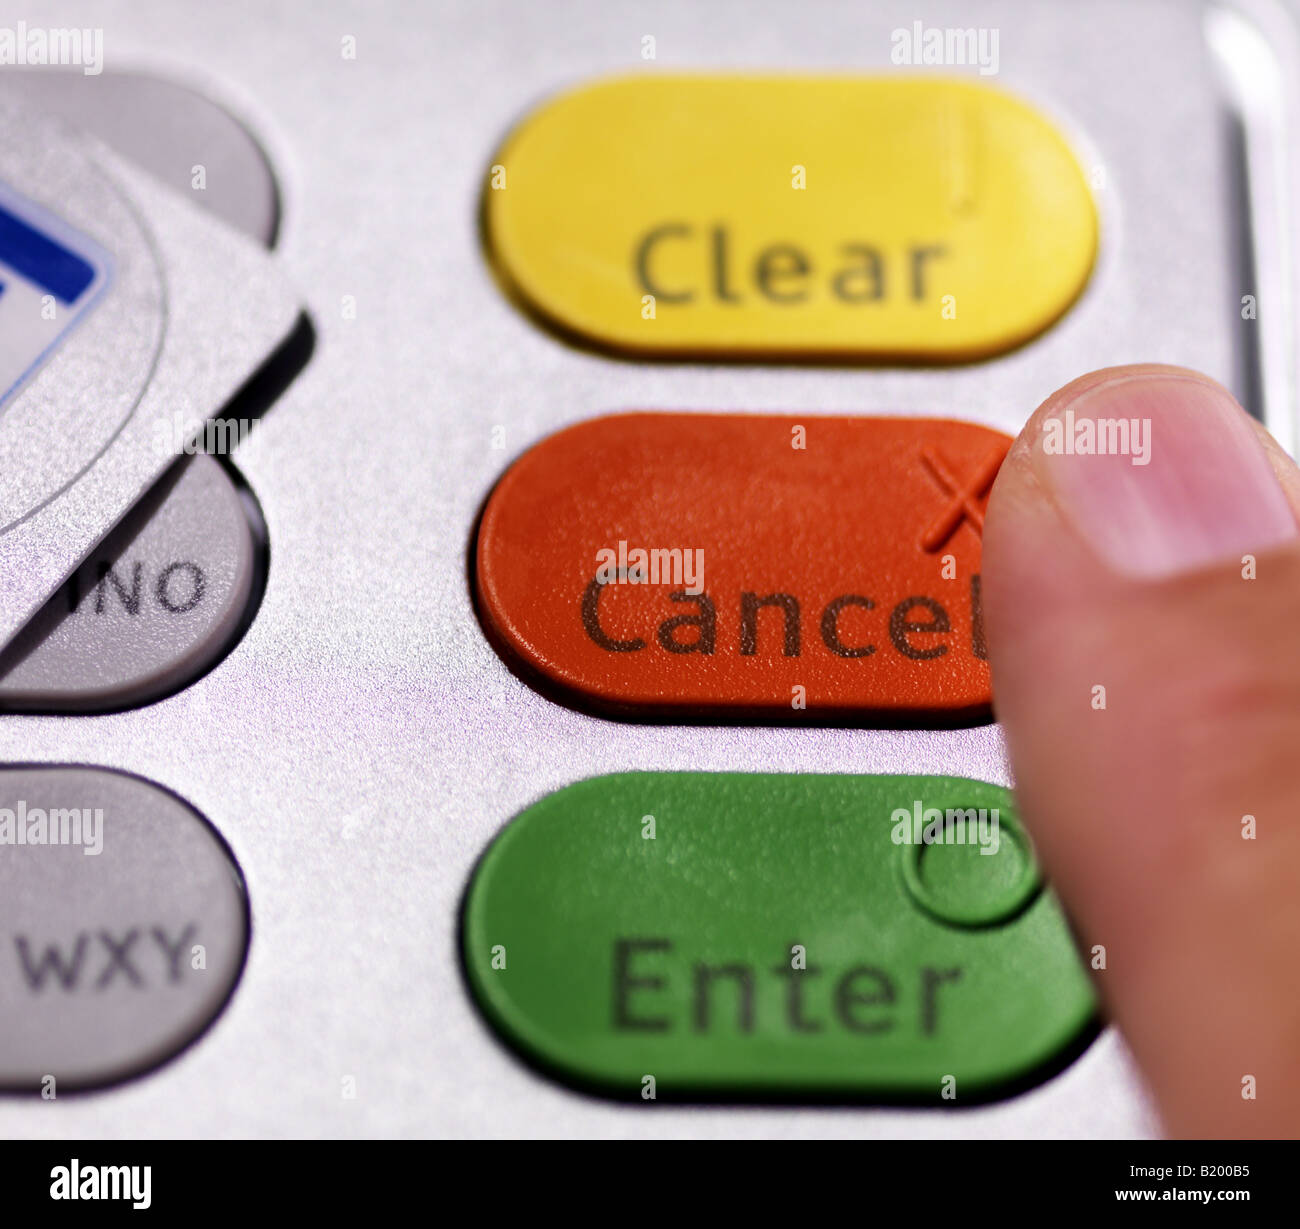 Finger about to press 'Cancel' on ATM machine keypad. Stock Photo